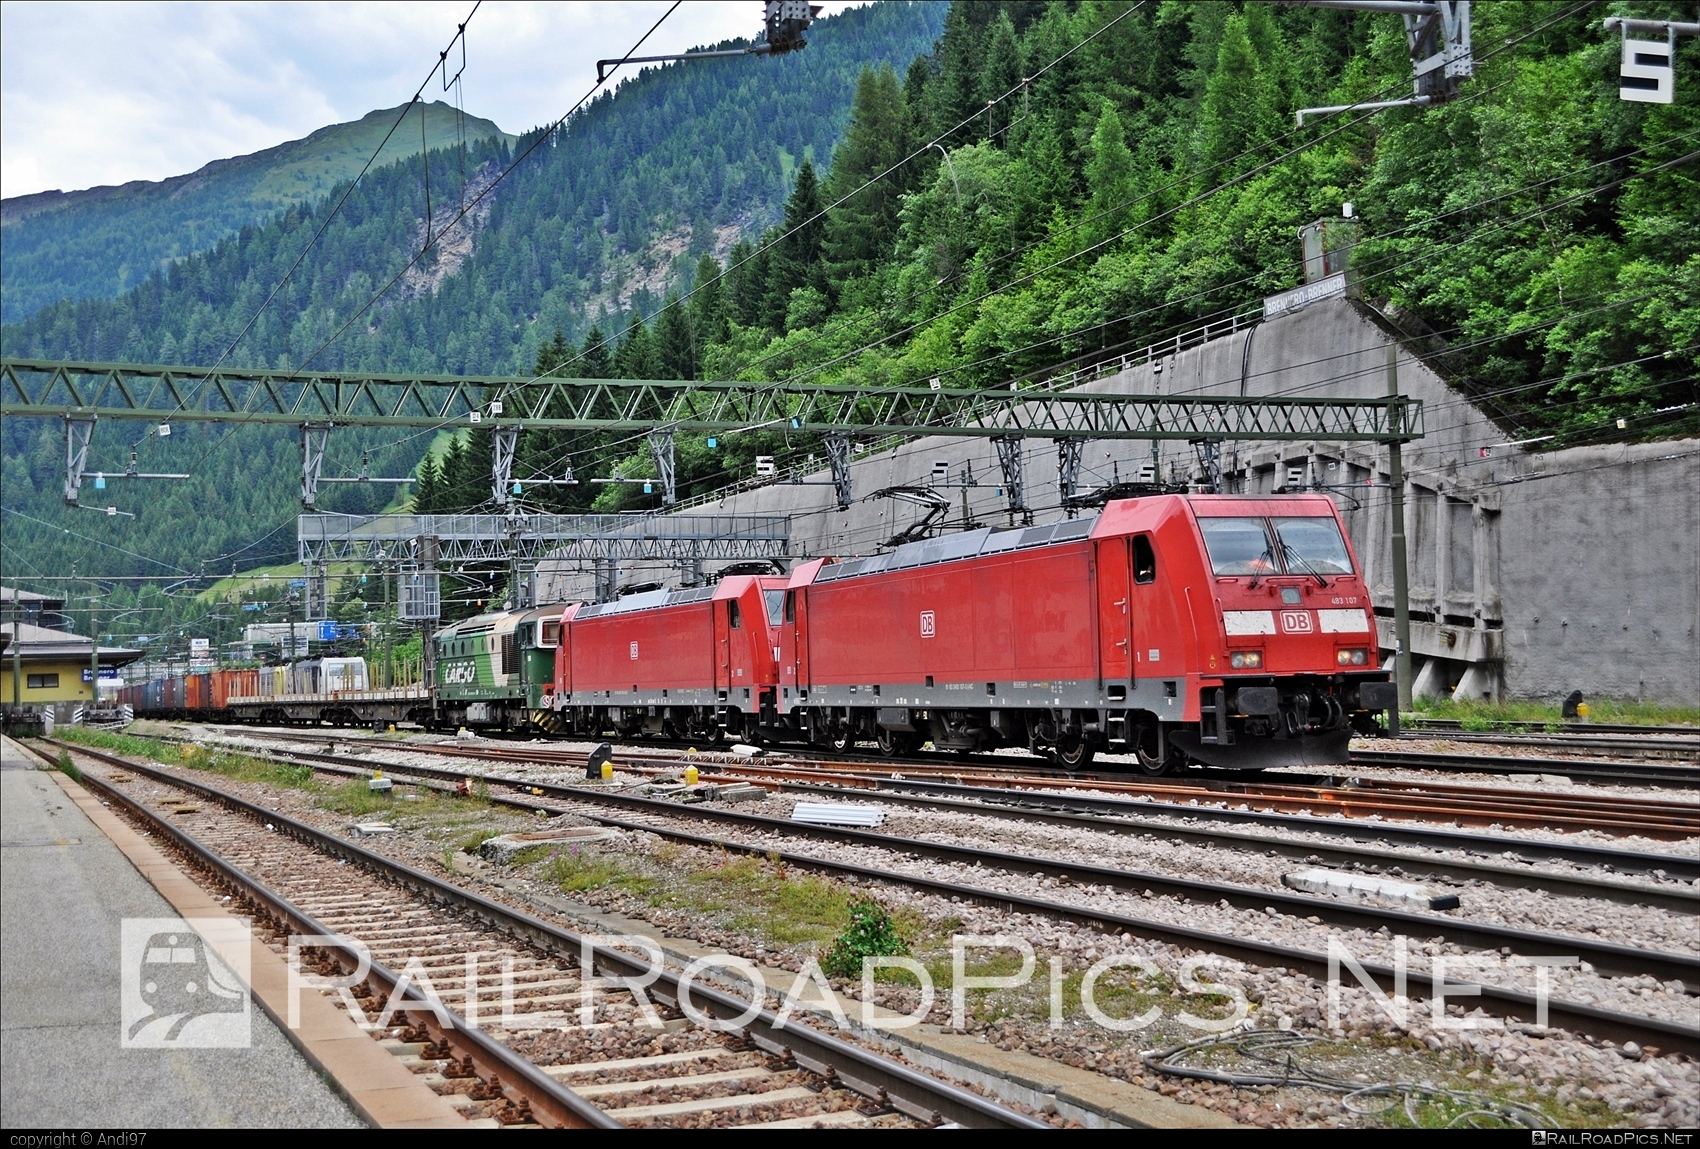 Bombardier TRAXX F140 DC - 483 107 operated by DB Cargo Italia S.r.l. #bombardier #bombardiertraxx #db #dbcargo #dbcargoitalia #traxx #traxxf140 #traxxf140dc #traxxf140dc1